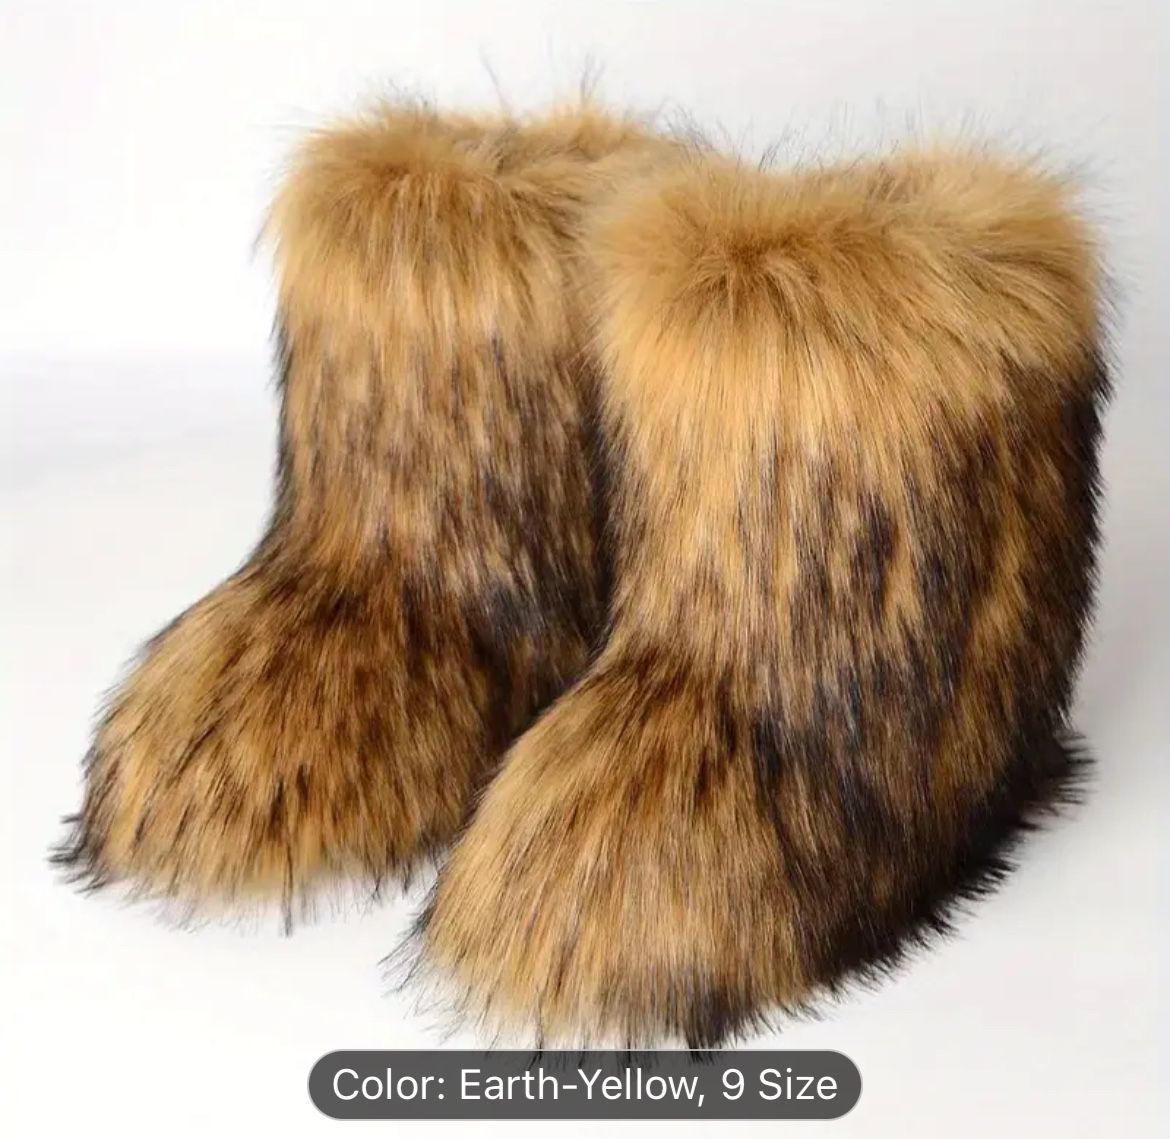 Women's Fluffy Furry Chelsea Snow Boots: Fashionable Winter Mid-Calf Slip-On, Warm, Flat Heel Outdoor Shoes